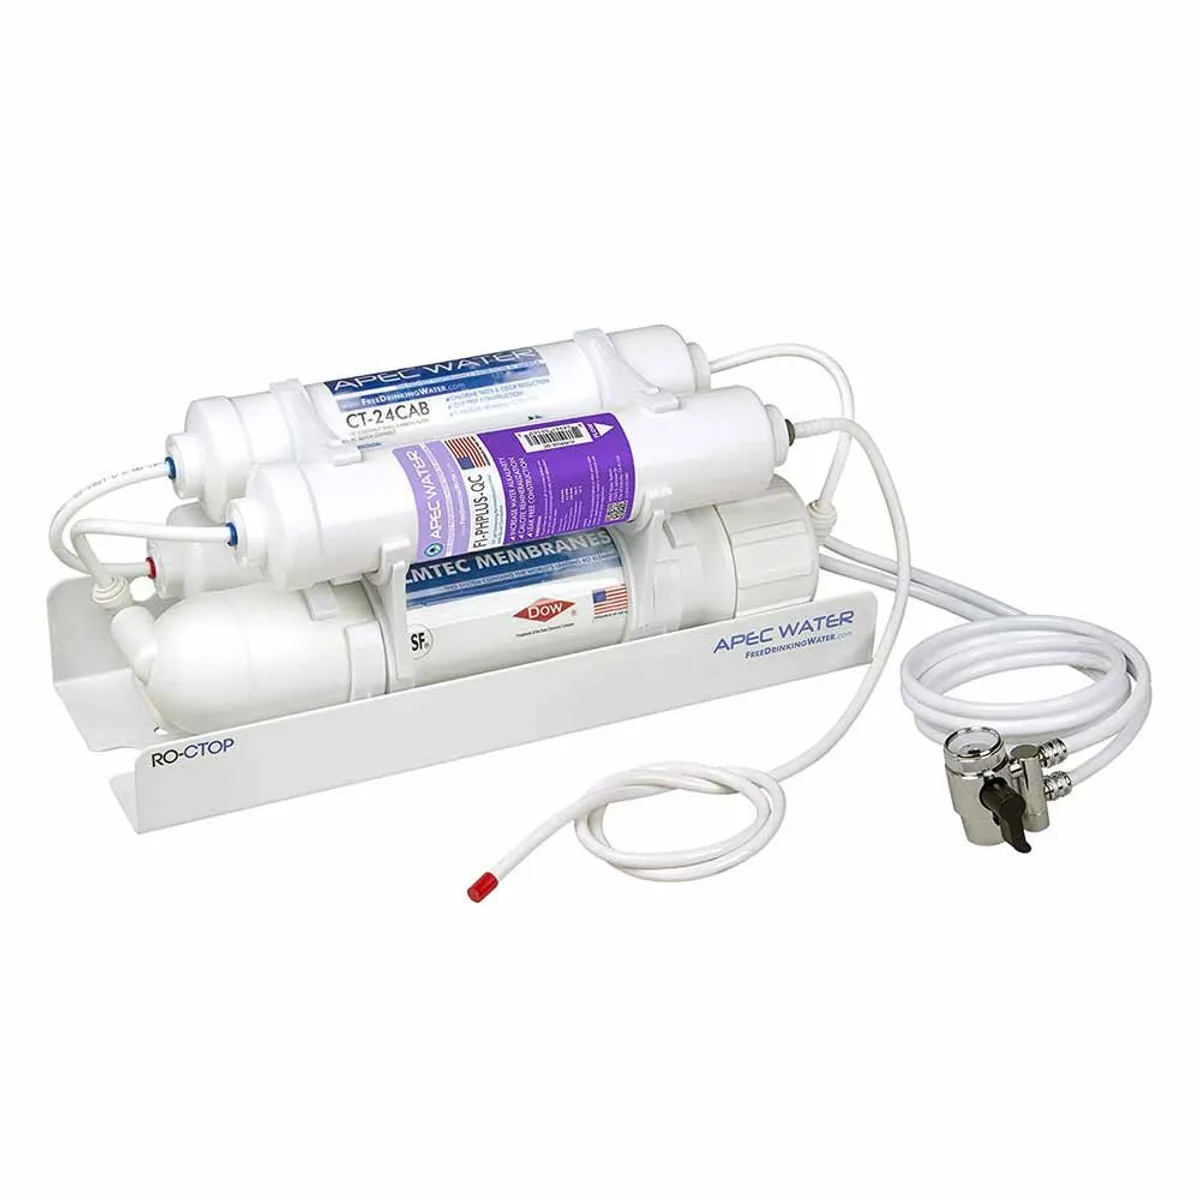 APEC Alkaline Mineral Portable Countertop Reverse Osmosis Water Filter Review